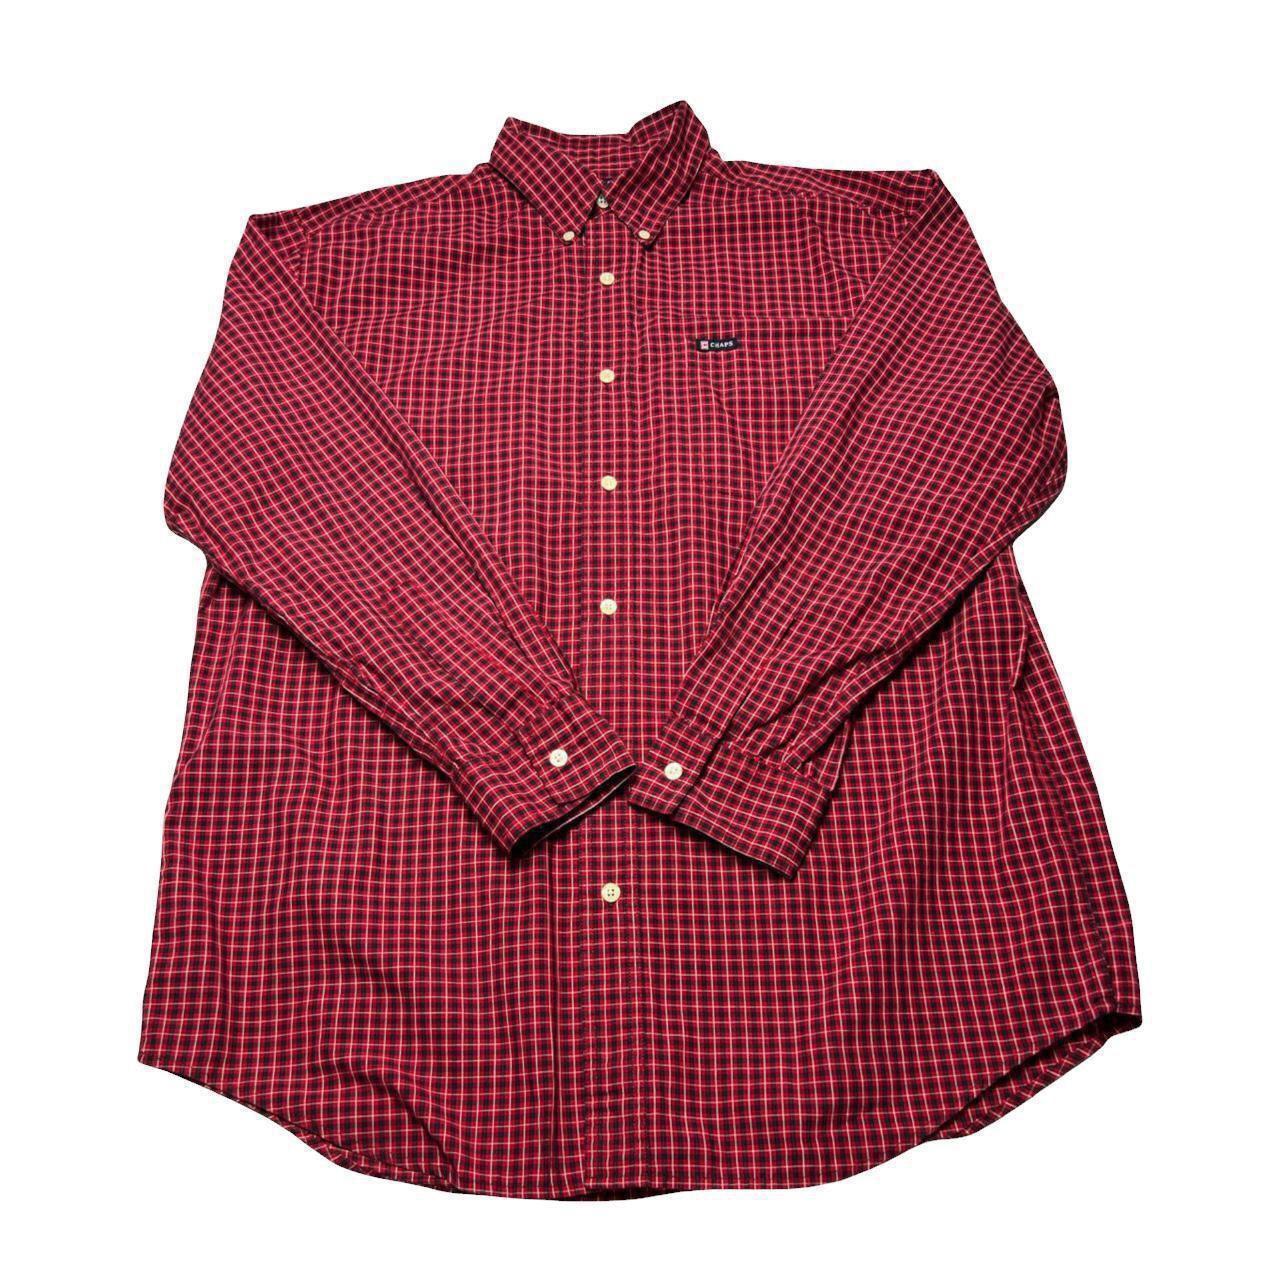 Chaps Men's Burgundy and Red Shirt | Depop